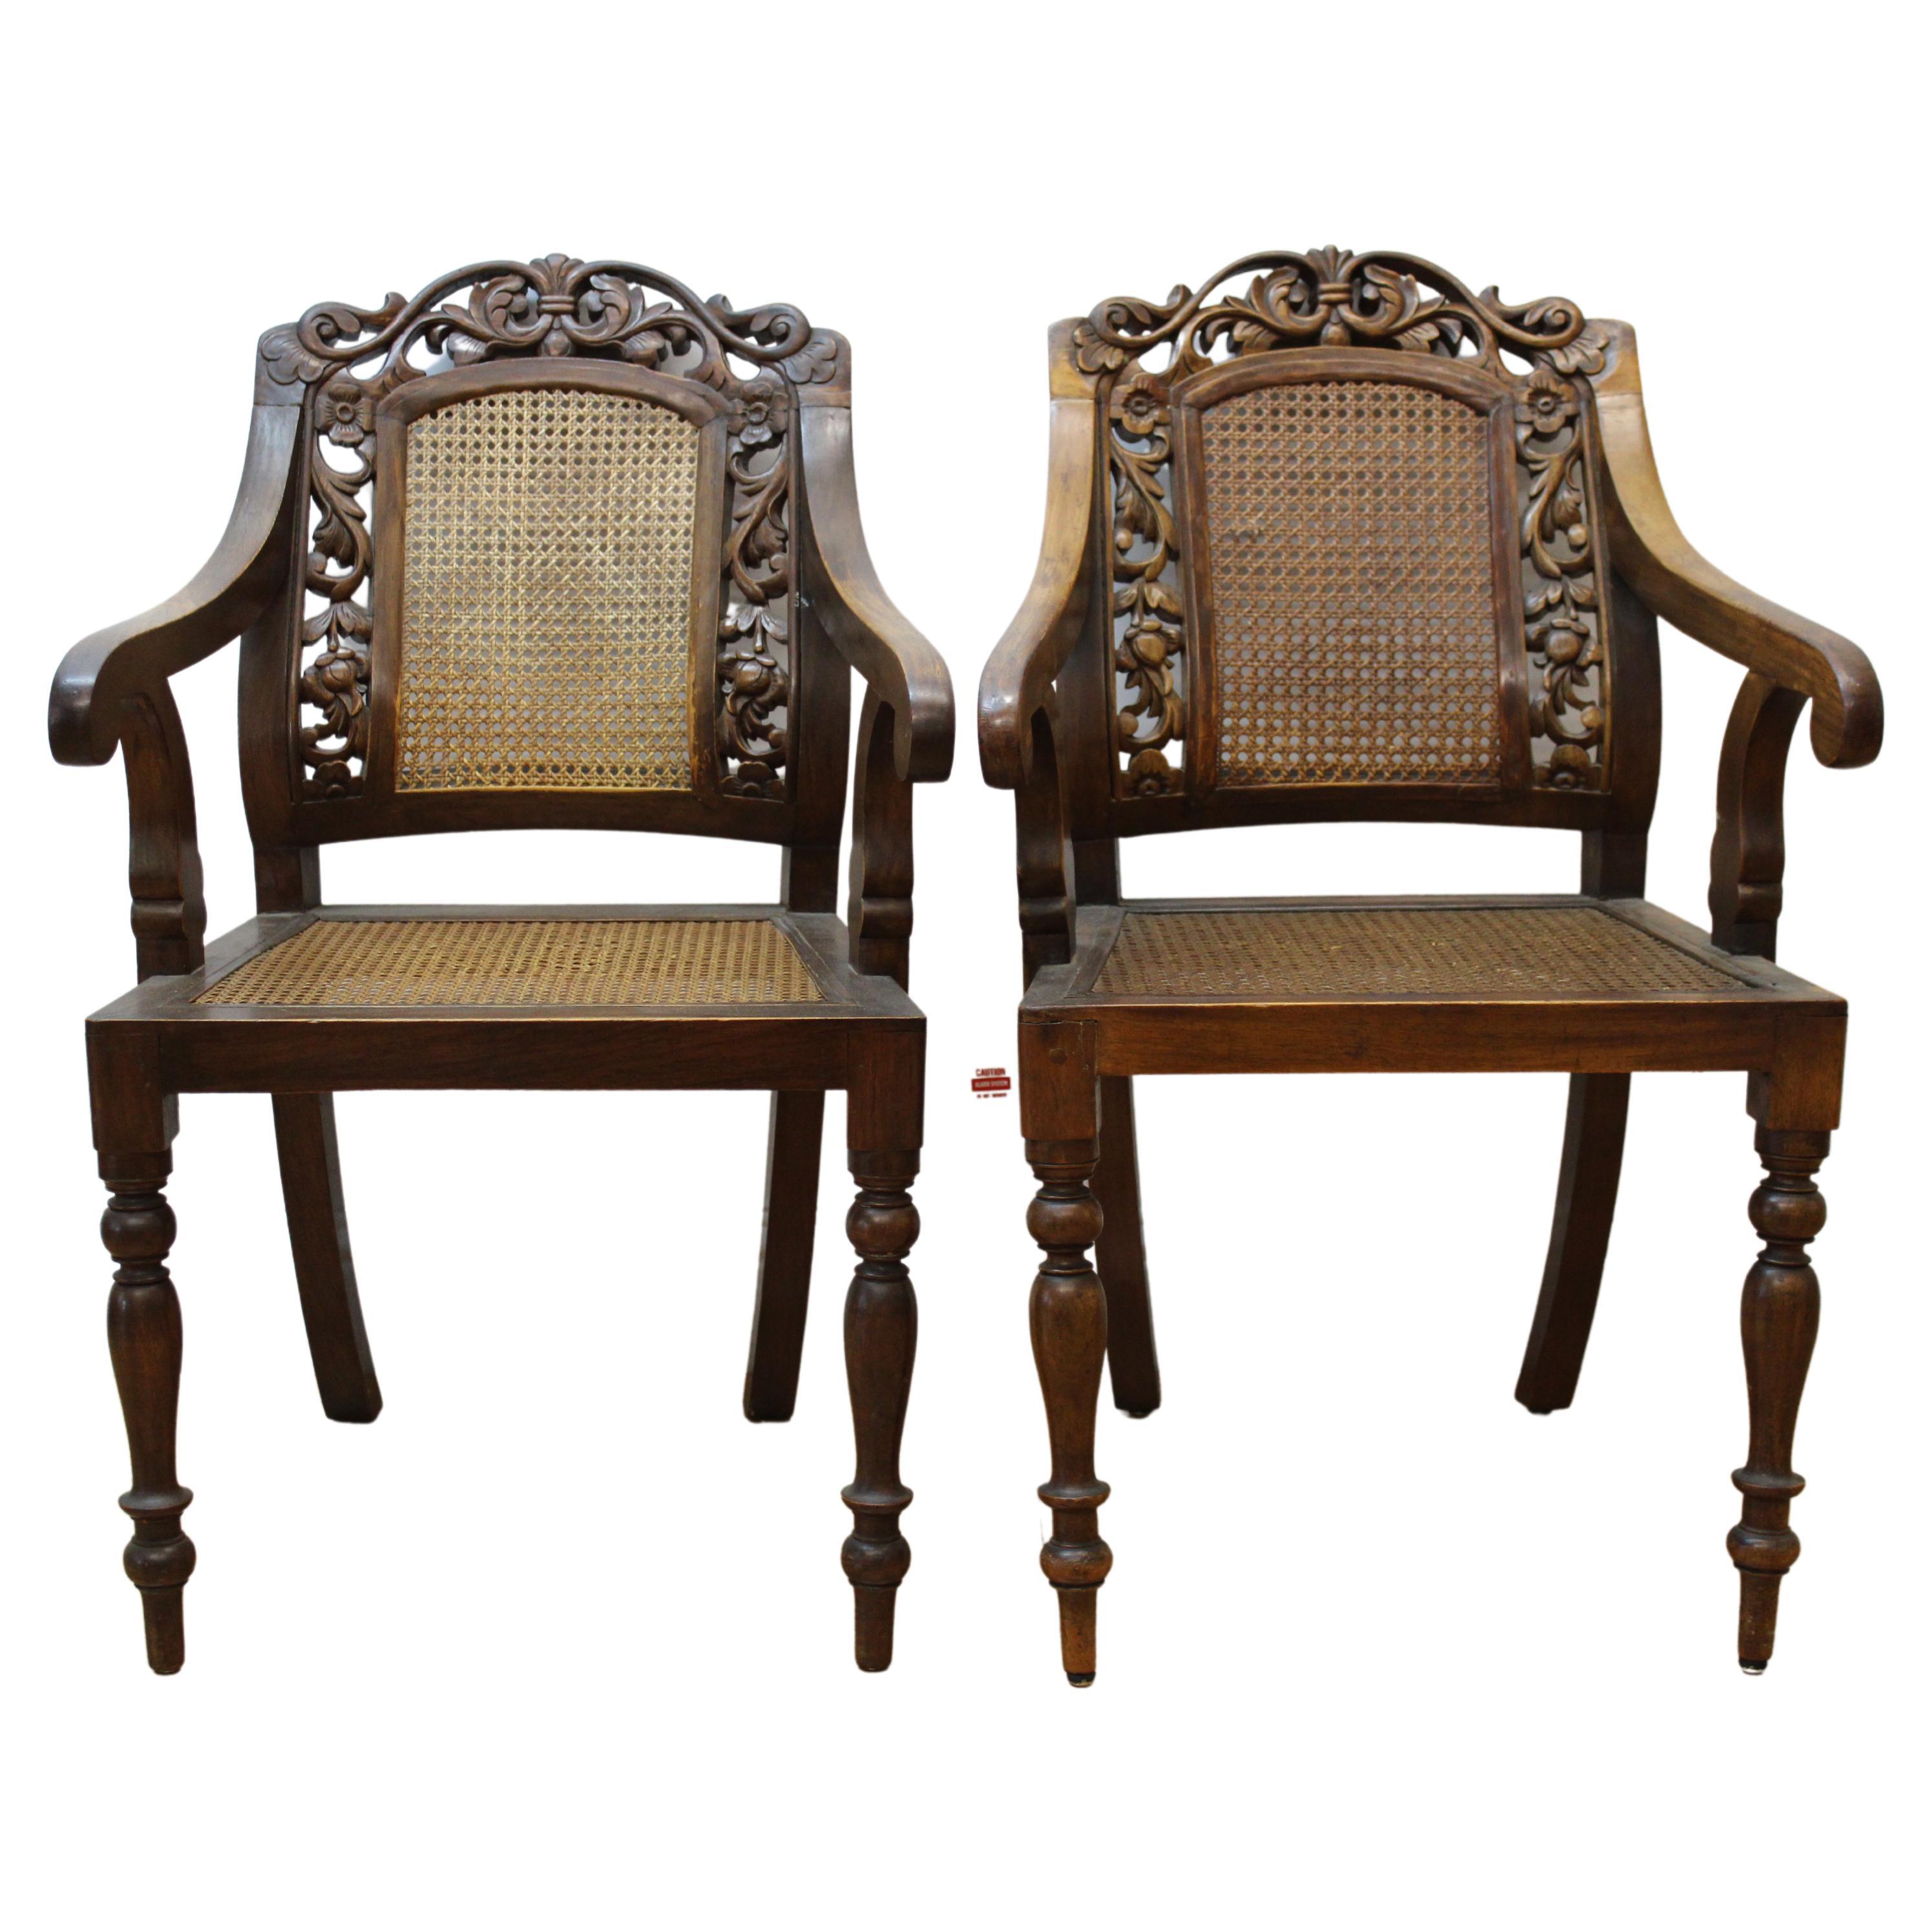 Pair of Caned & Carved Wood Arm Chairs